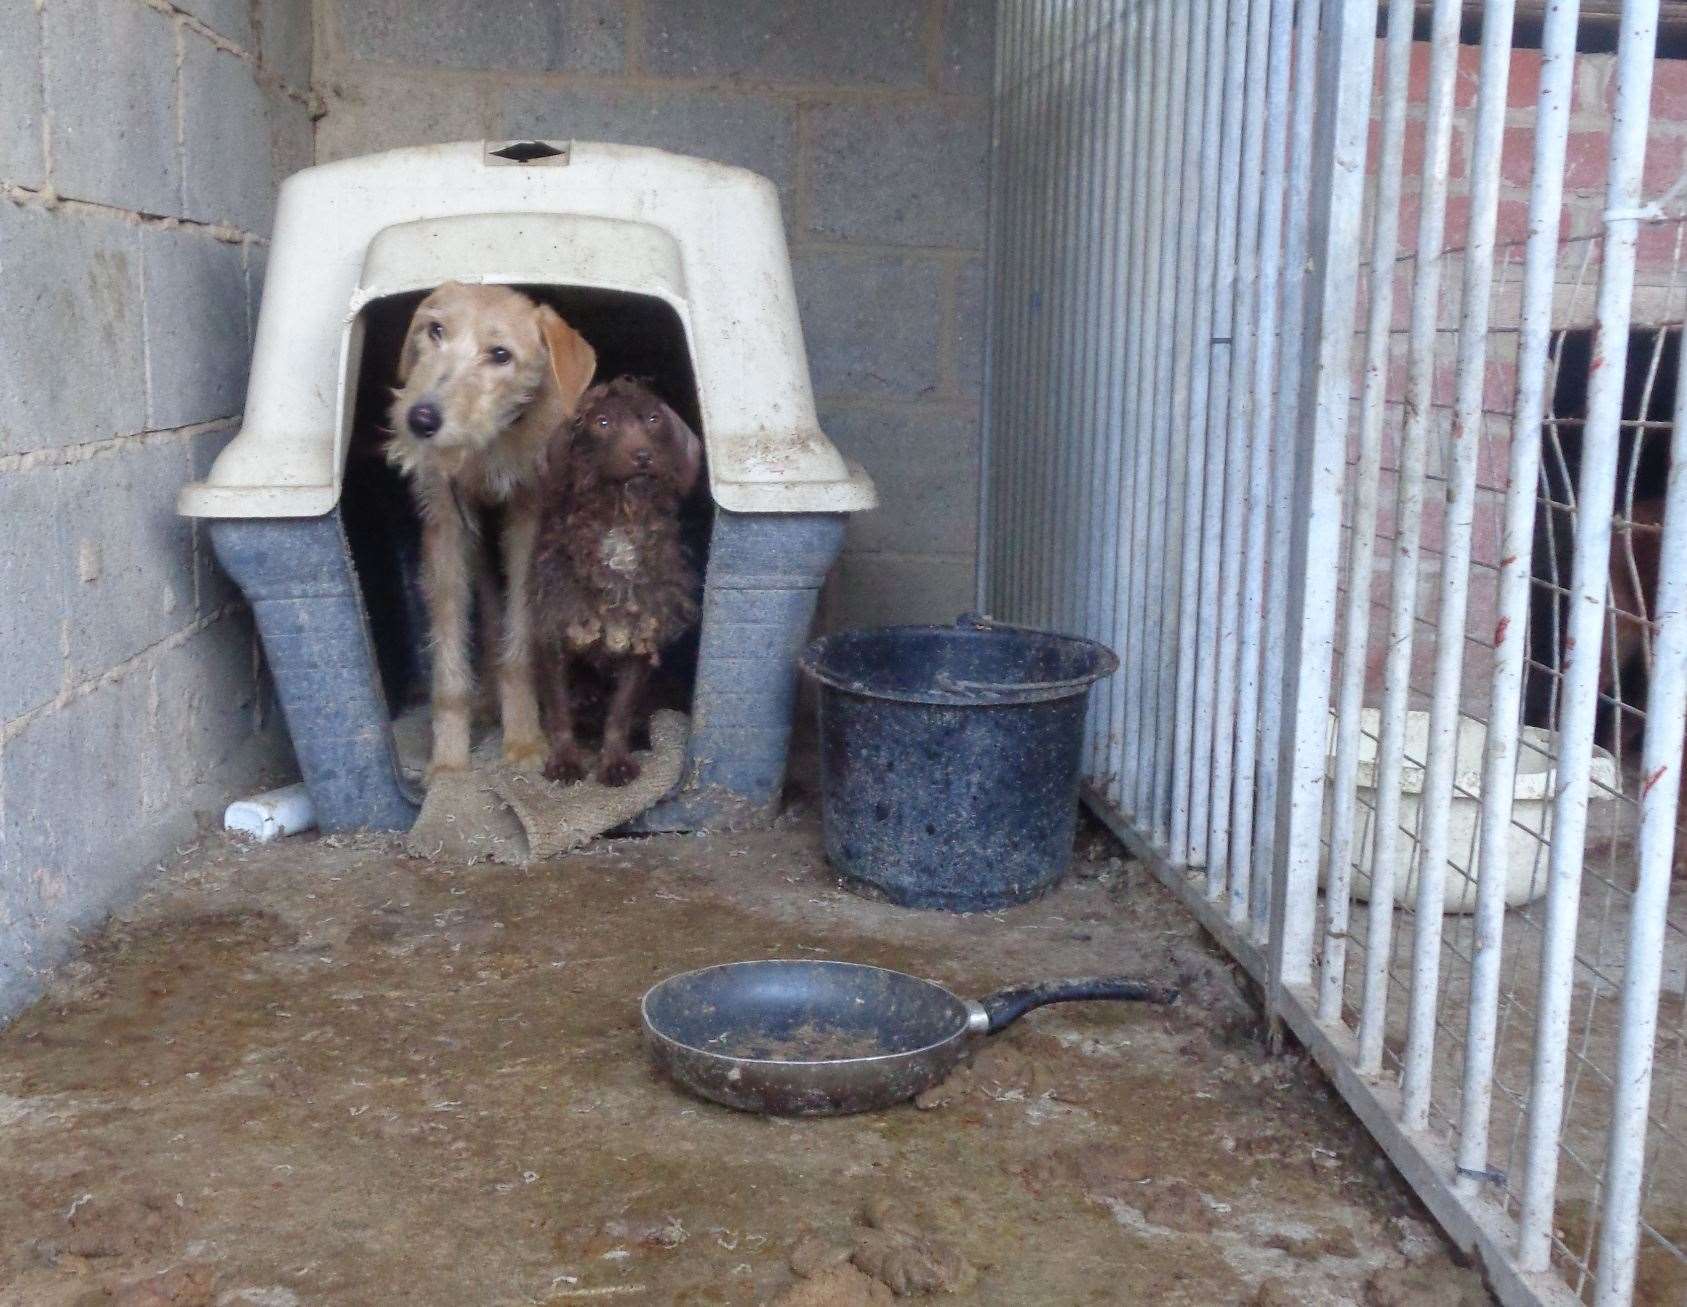 Eight dogs were found in "unacceptable conditions" after a warrant in Ditton. Picture: RSPCA